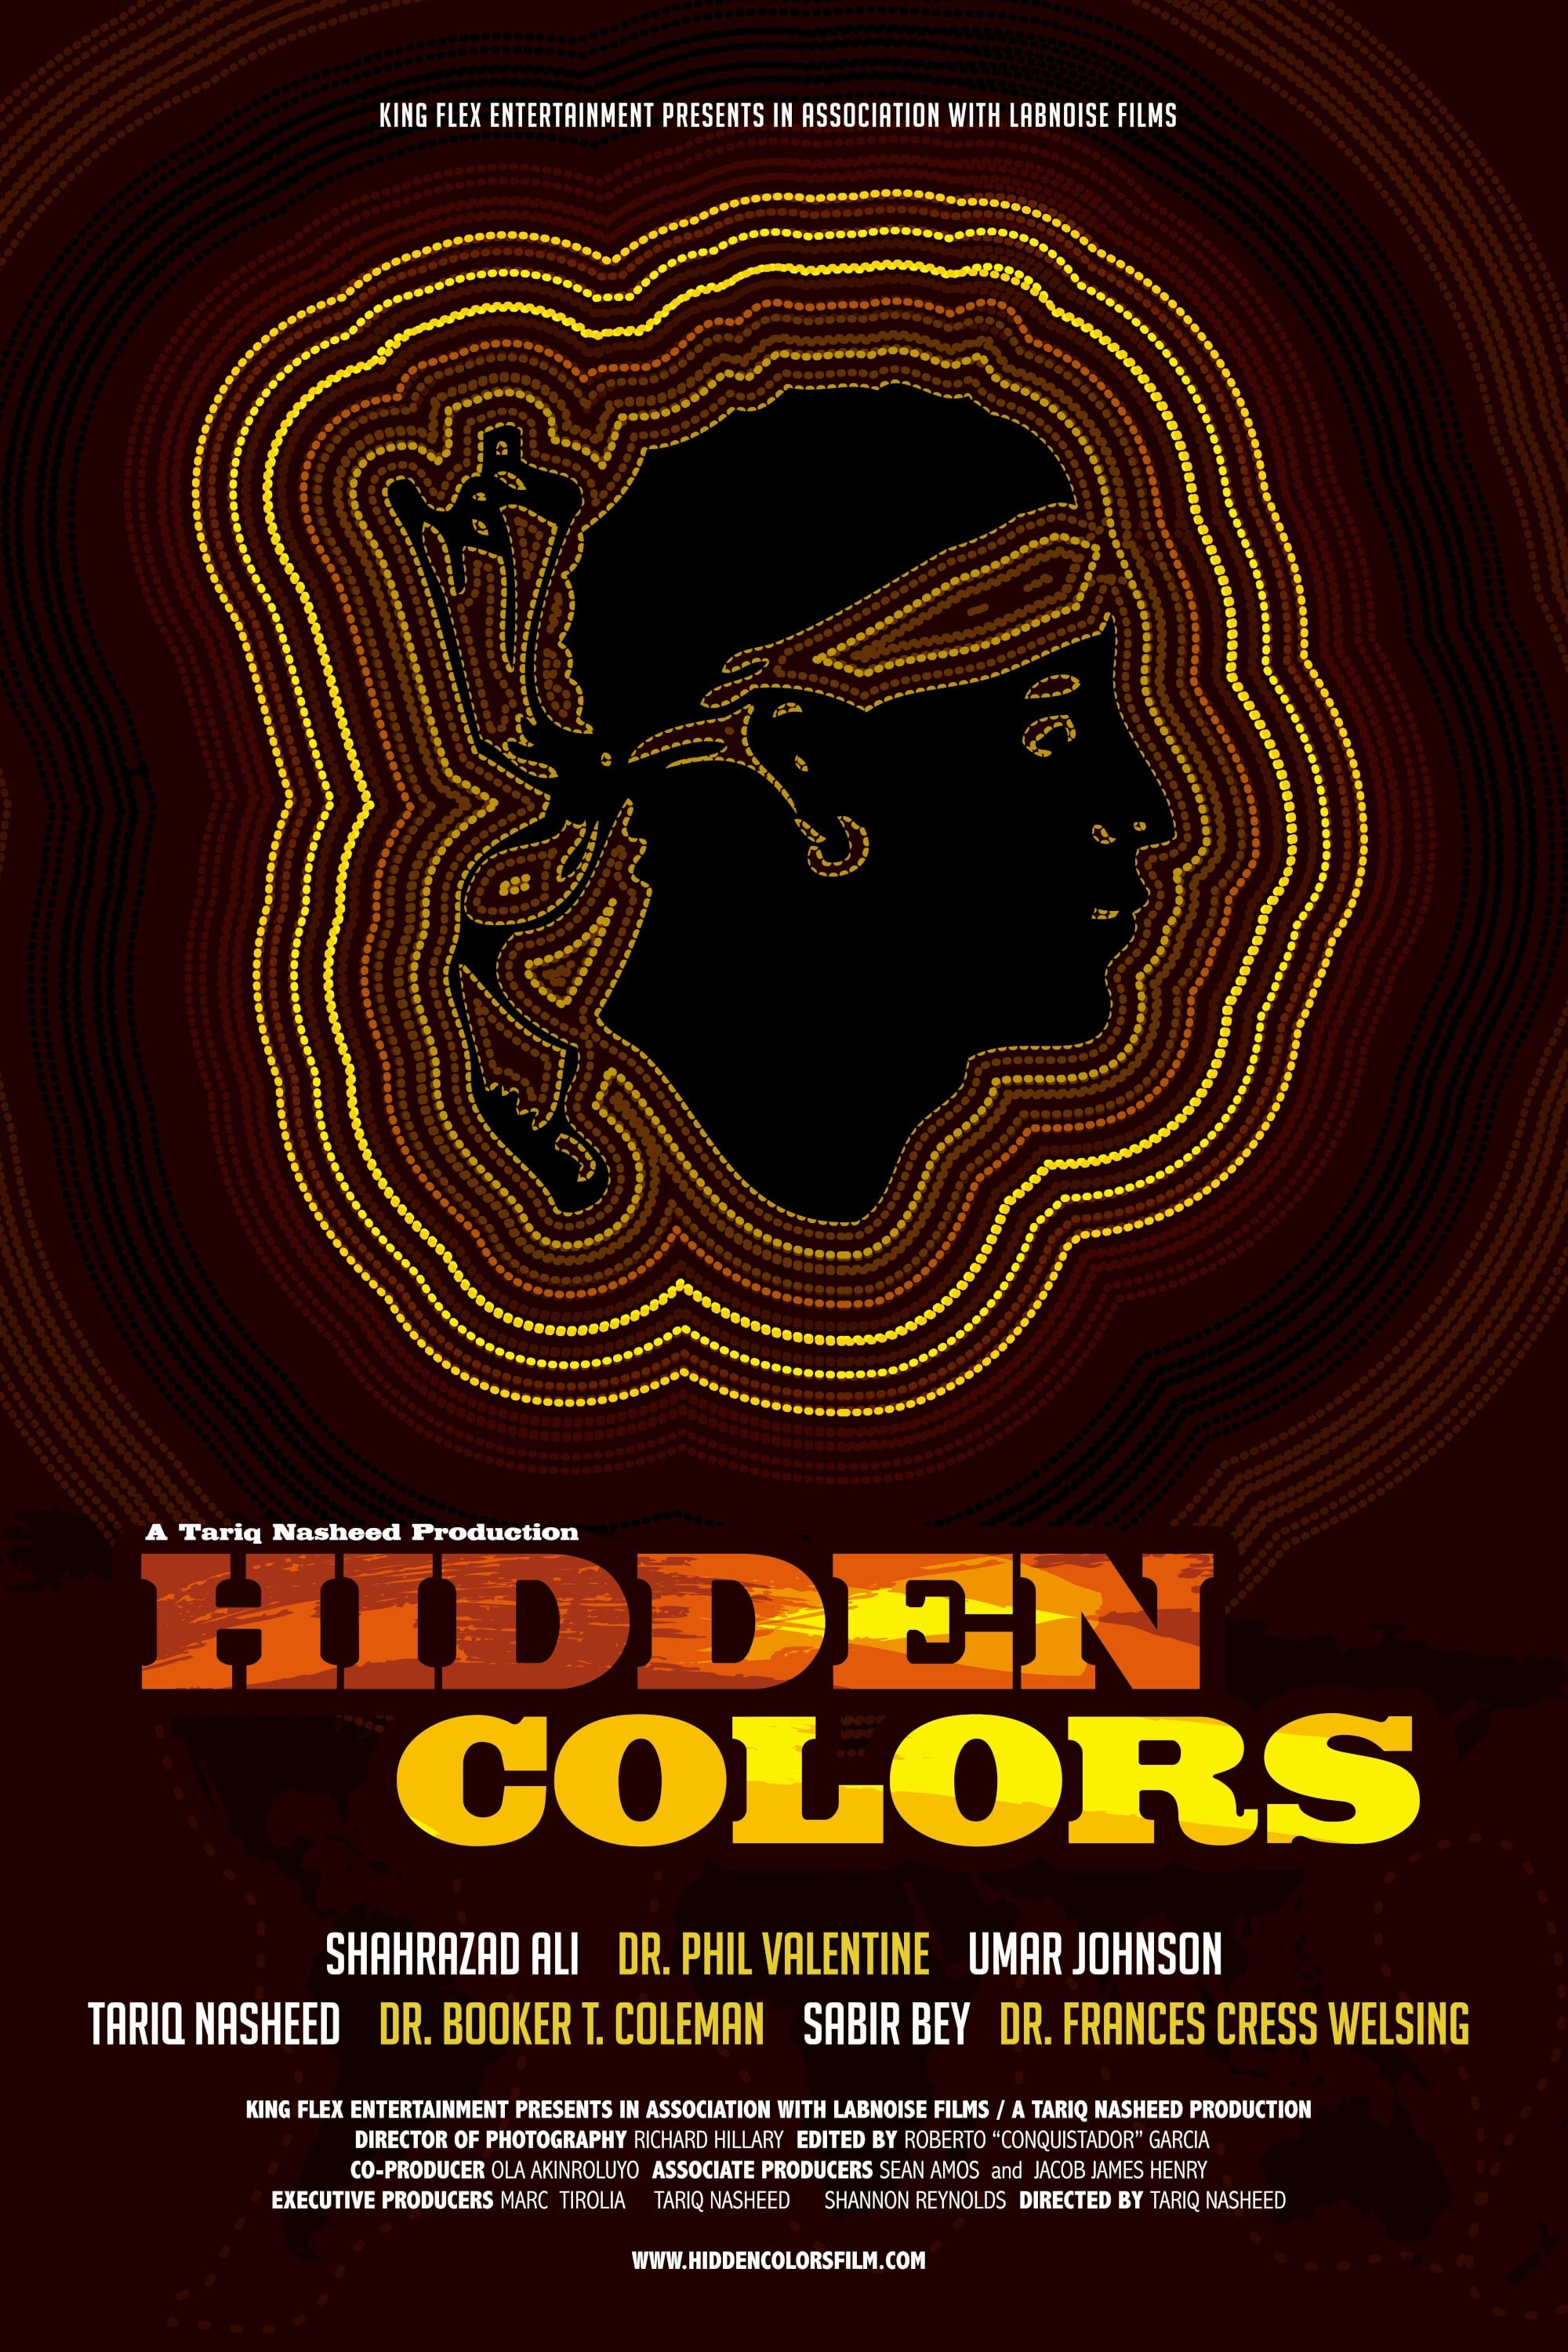 when was the movie hidden colors 1 released